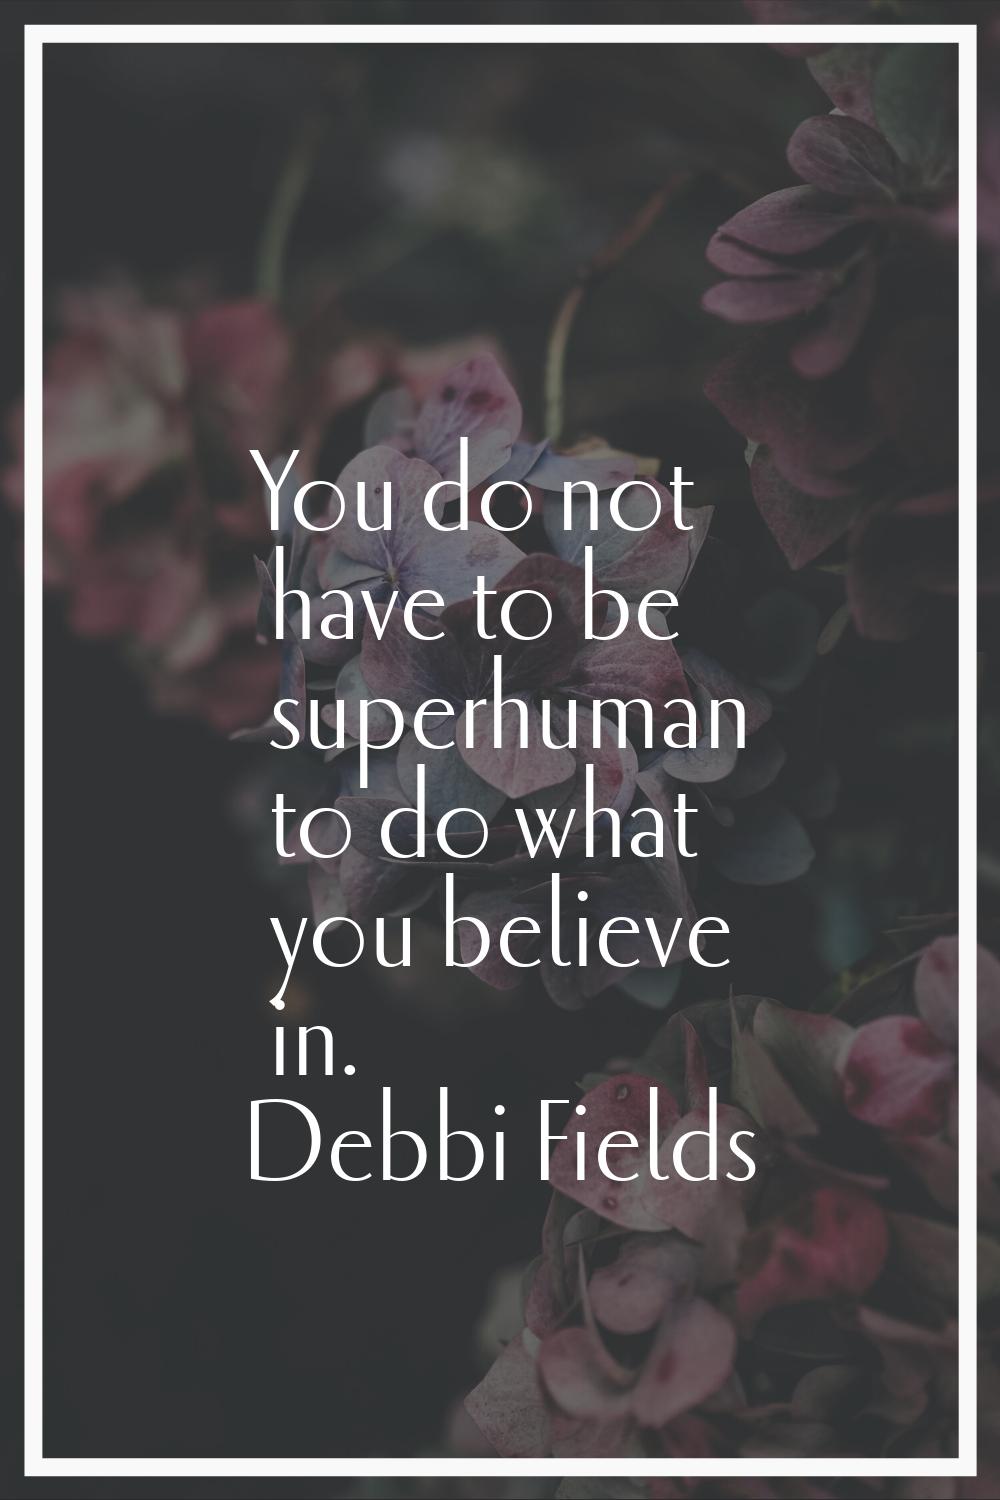 You do not have to be superhuman to do what you believe in.